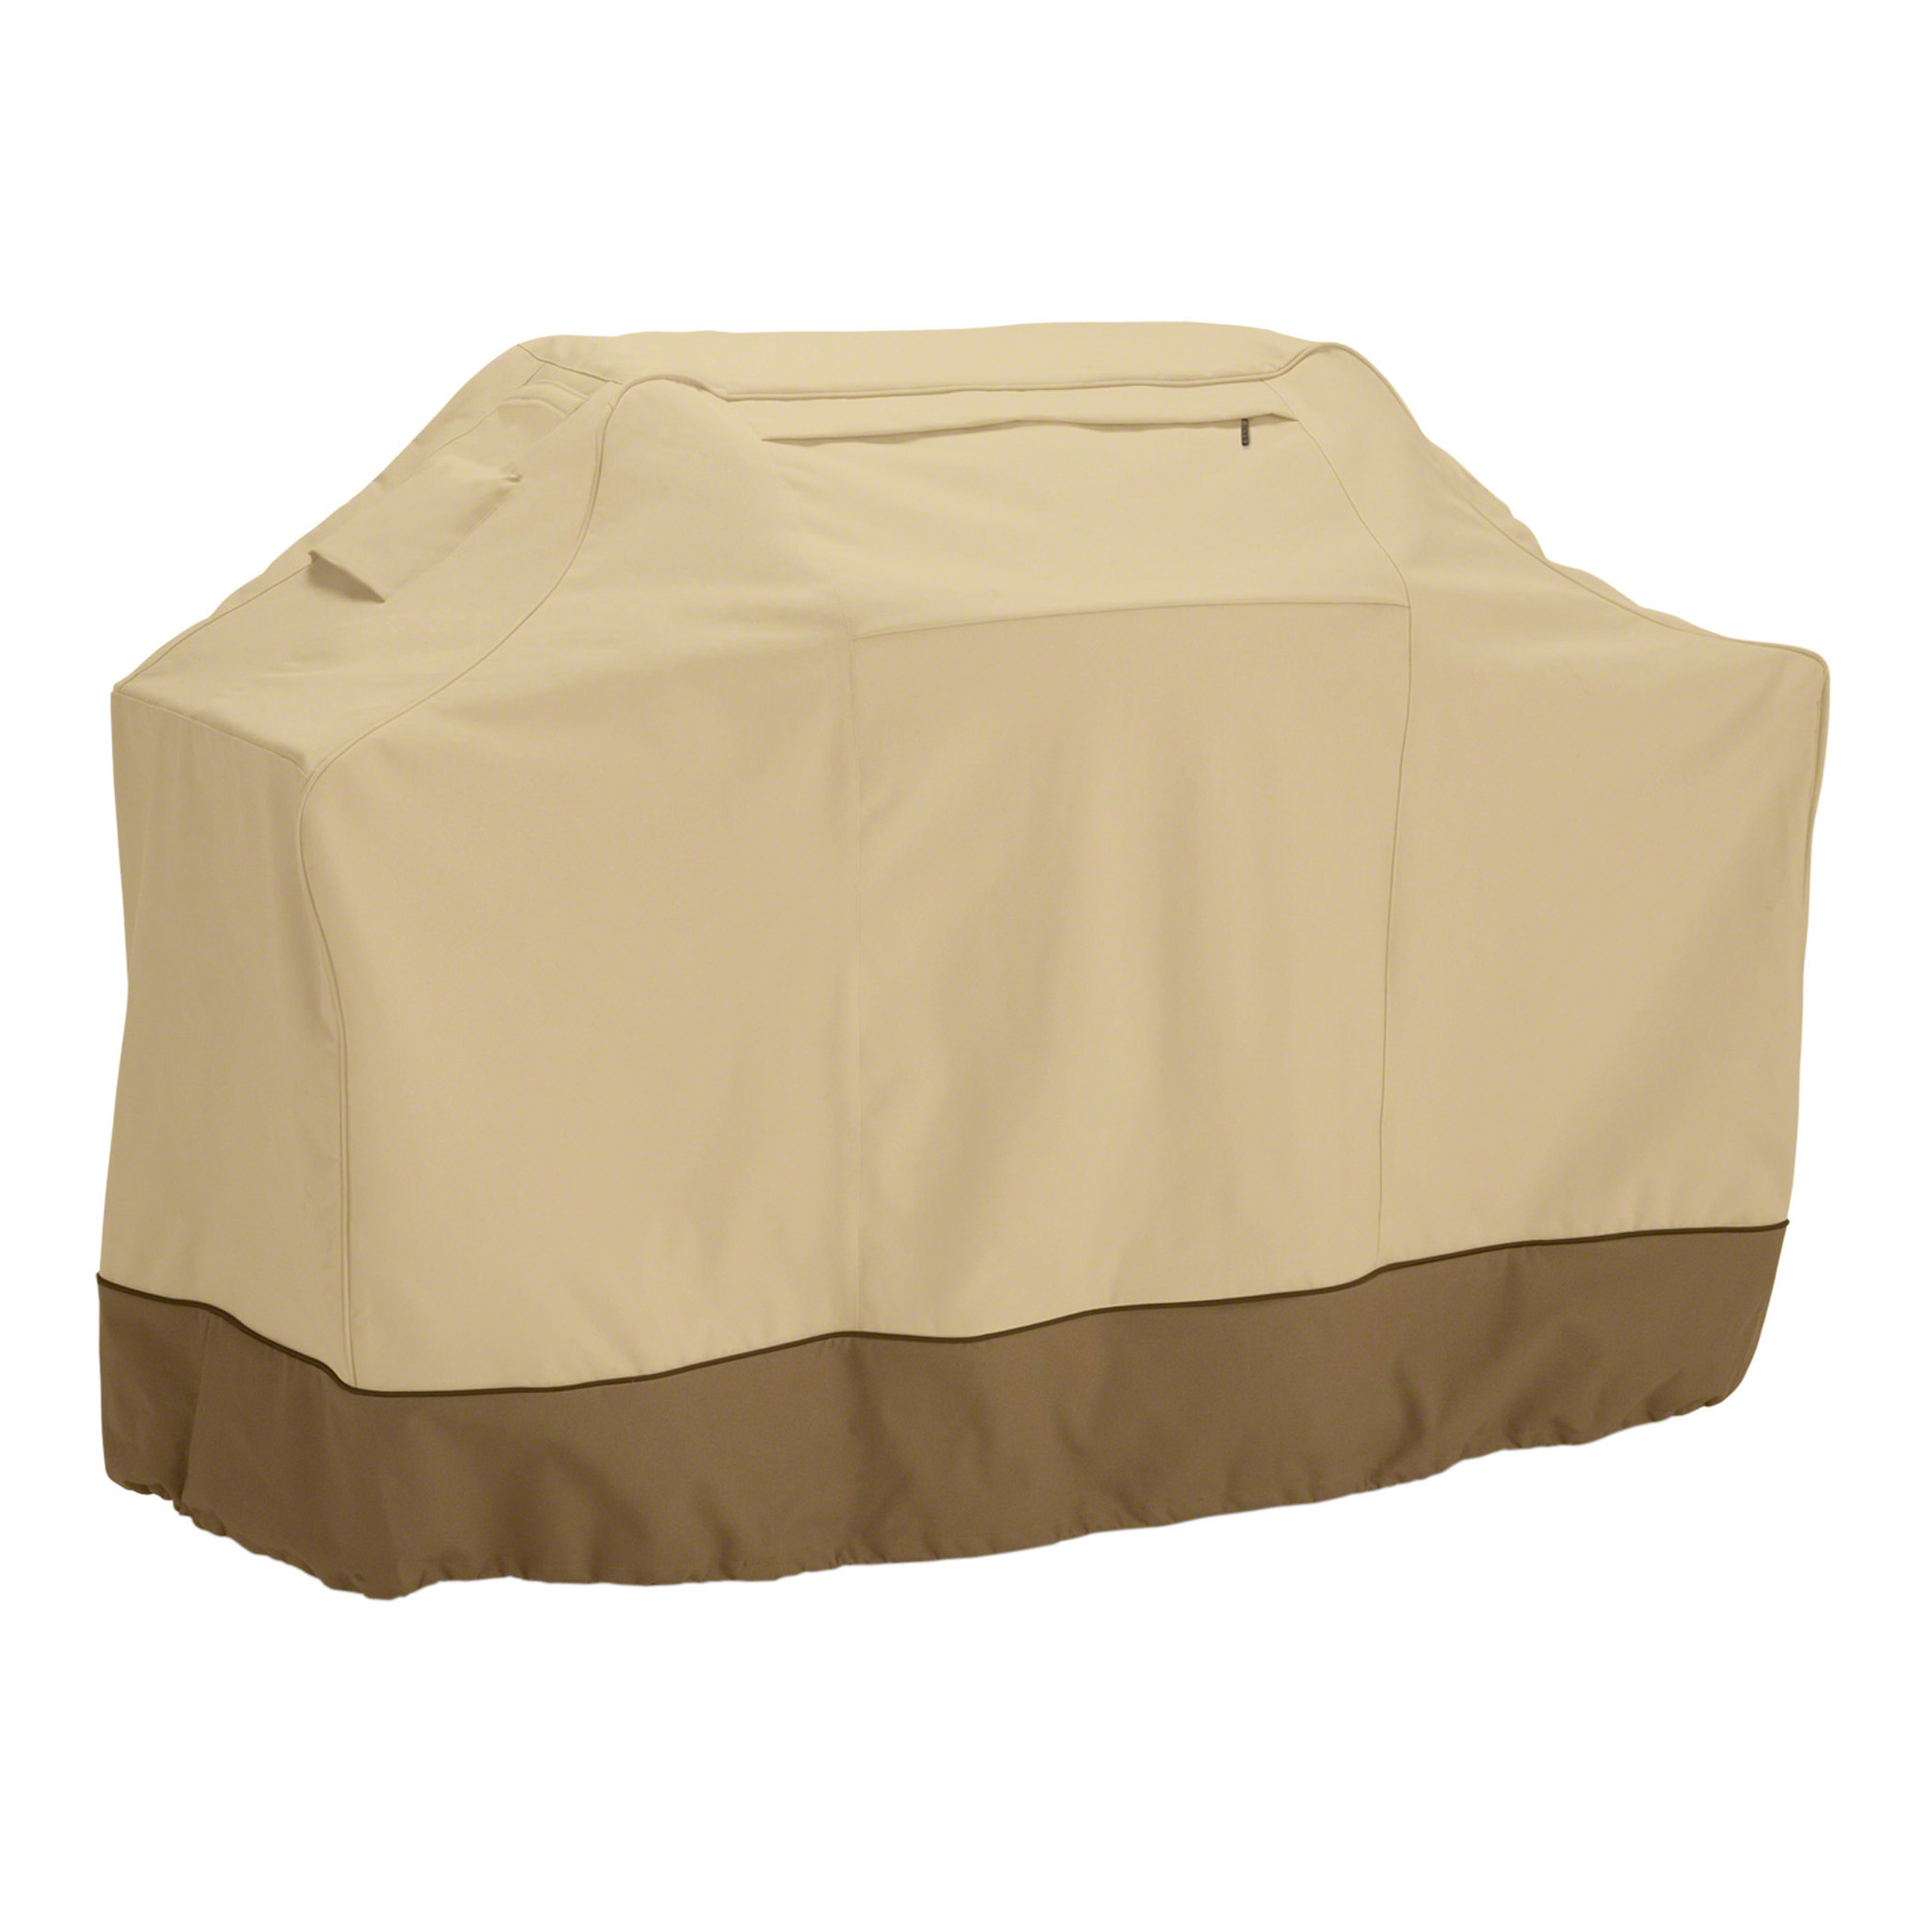 Classic Accessories Veranda Barbecue BBQ Grill Patio Storage Cover, Up to 70" Wide, X-Large - image 1 of 11